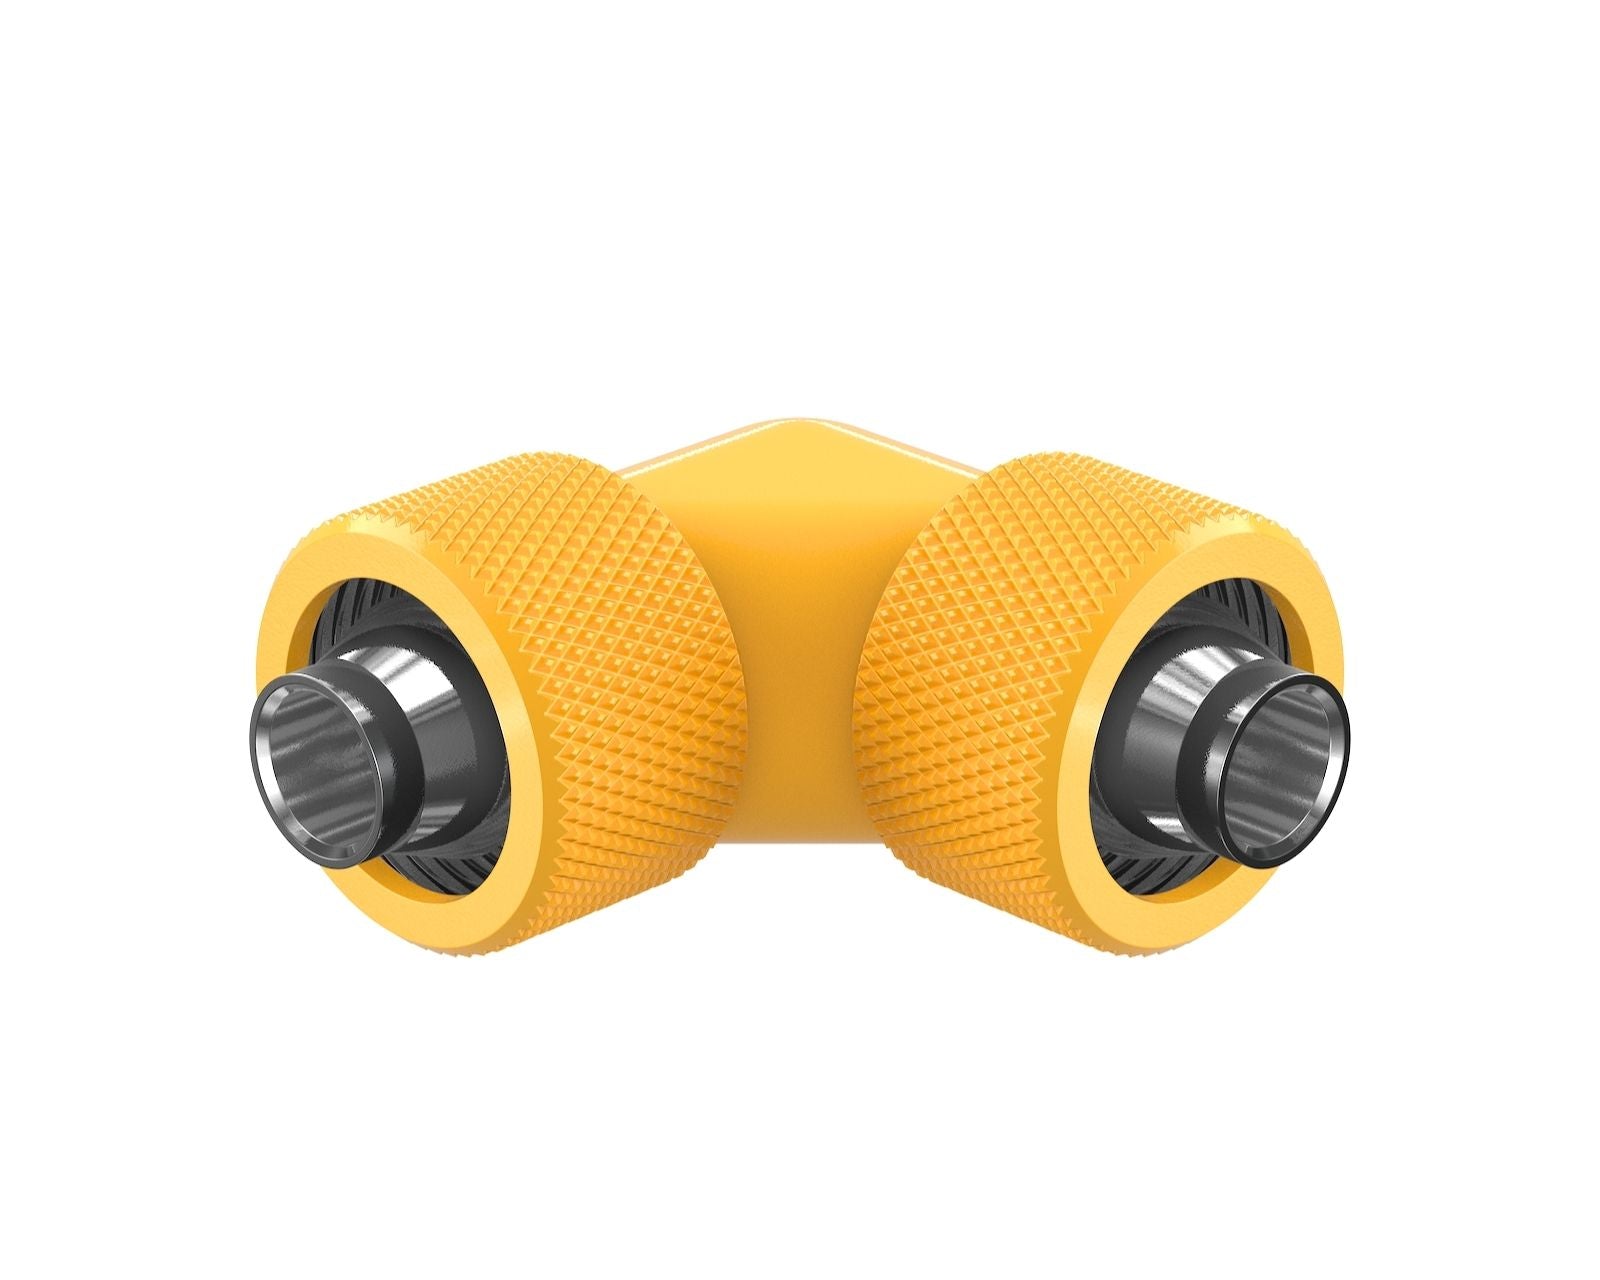 PrimoChill SecureFit SX - Premium 90 Degree Compression Fitting Set For 7/16in ID x 5/8in OD Flexible Tubing (F-SFSX75890) - Available in 20+ Colors, Custom Watercooling Loop Ready - Yellow